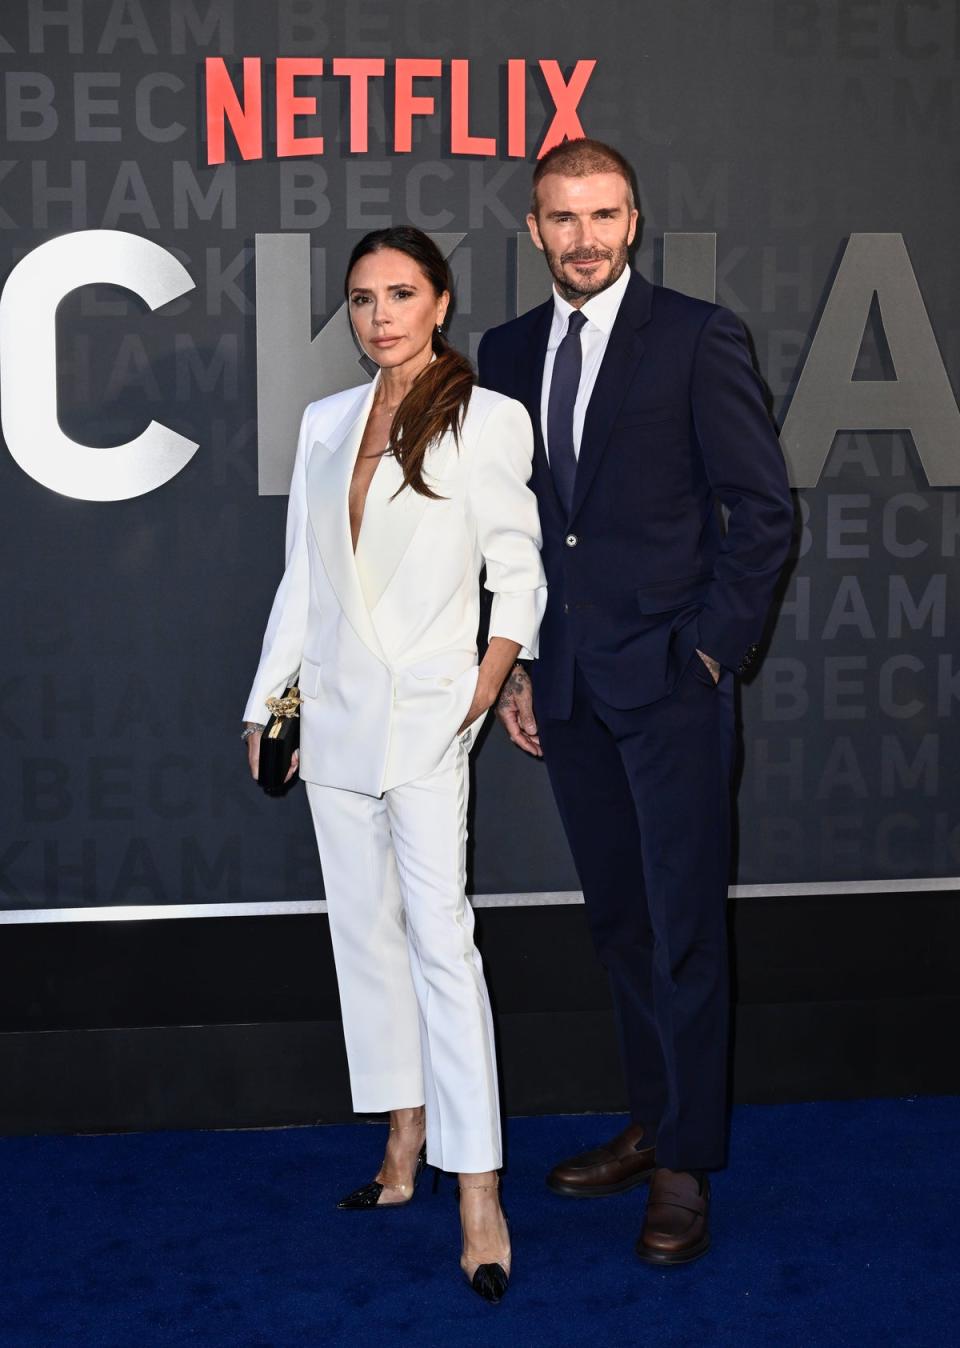 With David Beckham at the Netflix 'Beckham' UK Premiere in London on October 3, 2023 (Gareth Cattermole/Getty Images)